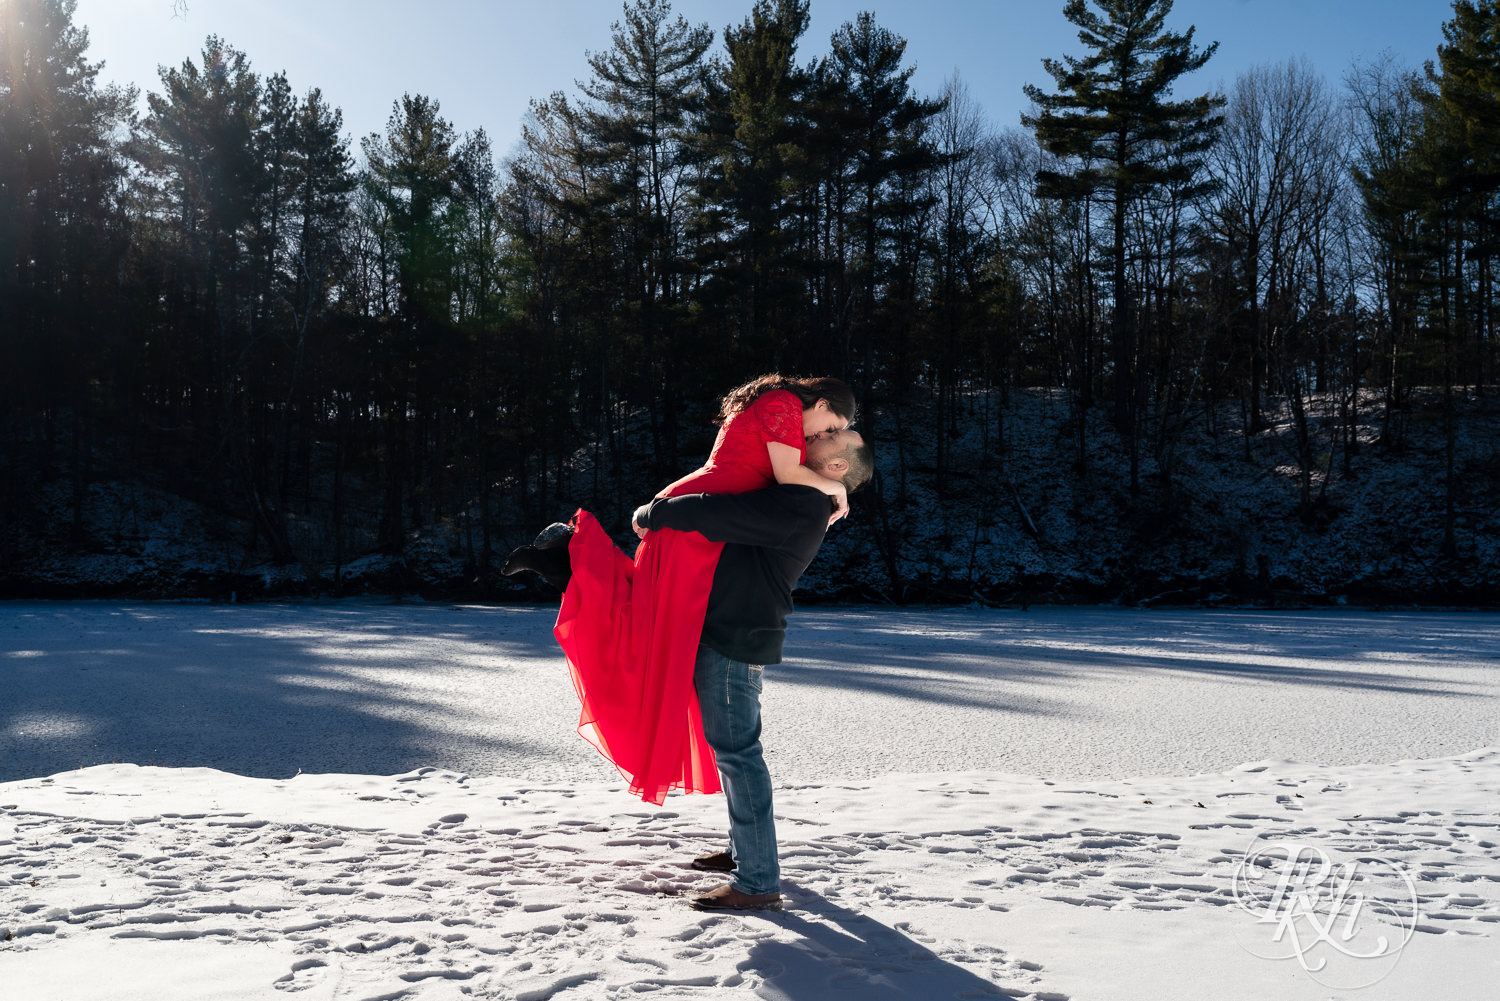 Man in jeans lifts woman in red dress in the snow during winter engagement photography in Pine City, Minnesota.